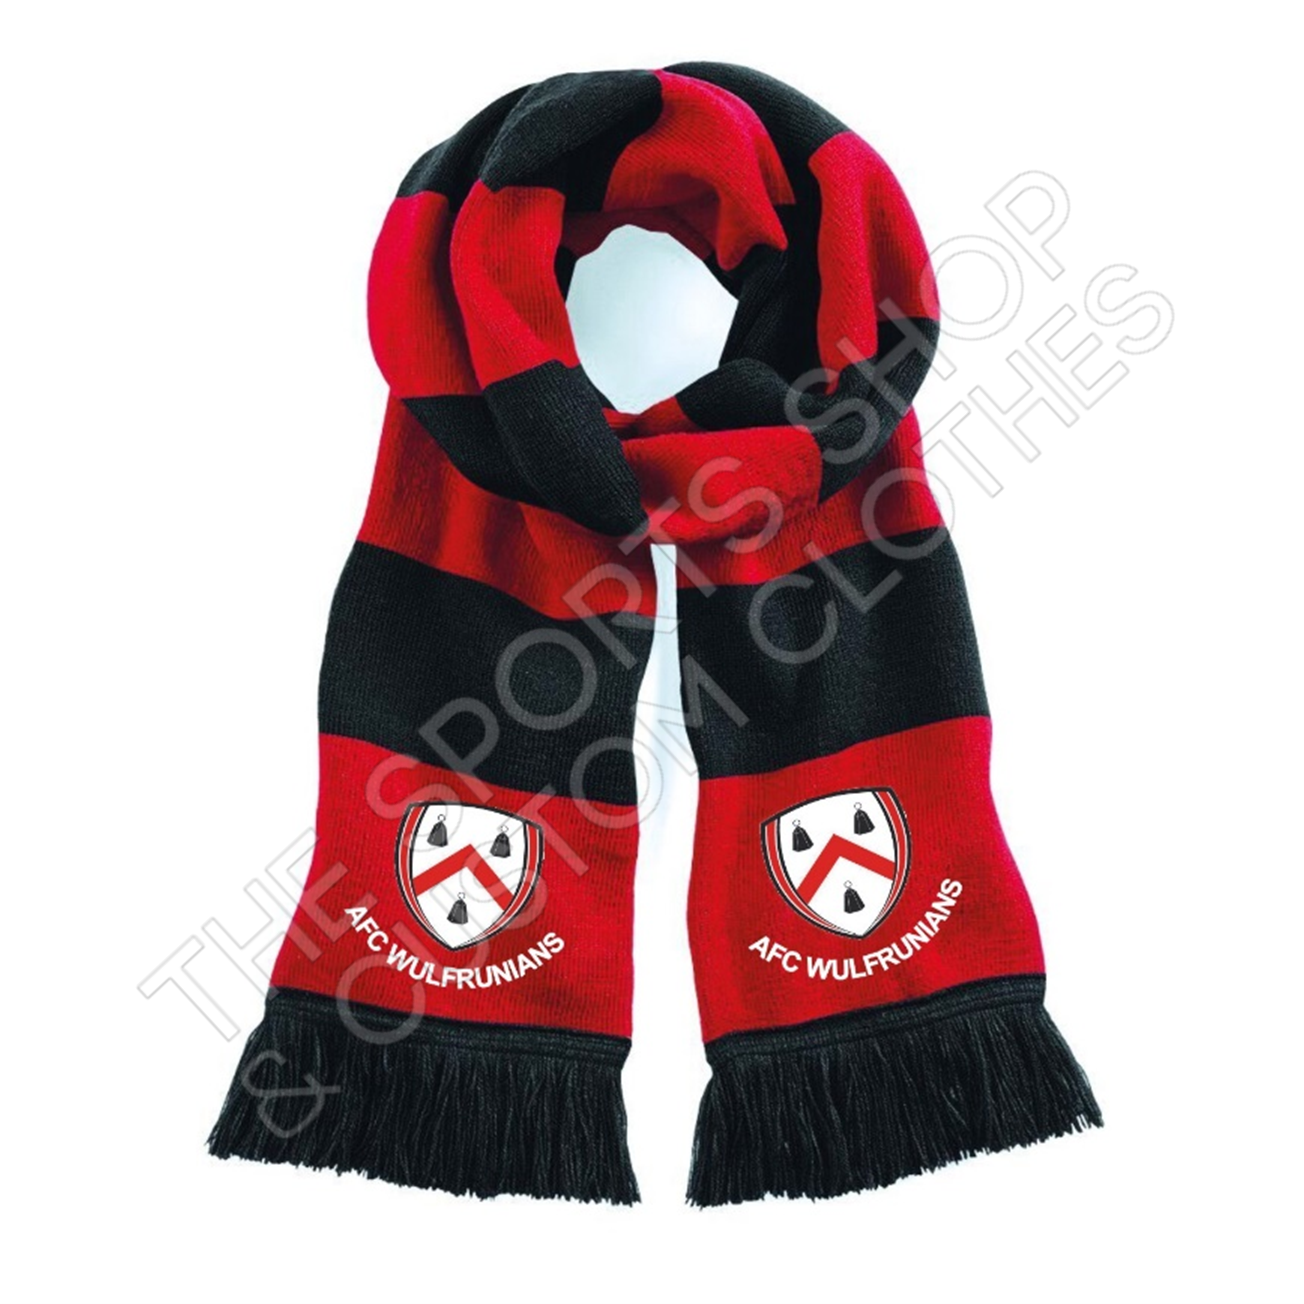 AFC Wulfrunians - Red/Black Supporters Scarf